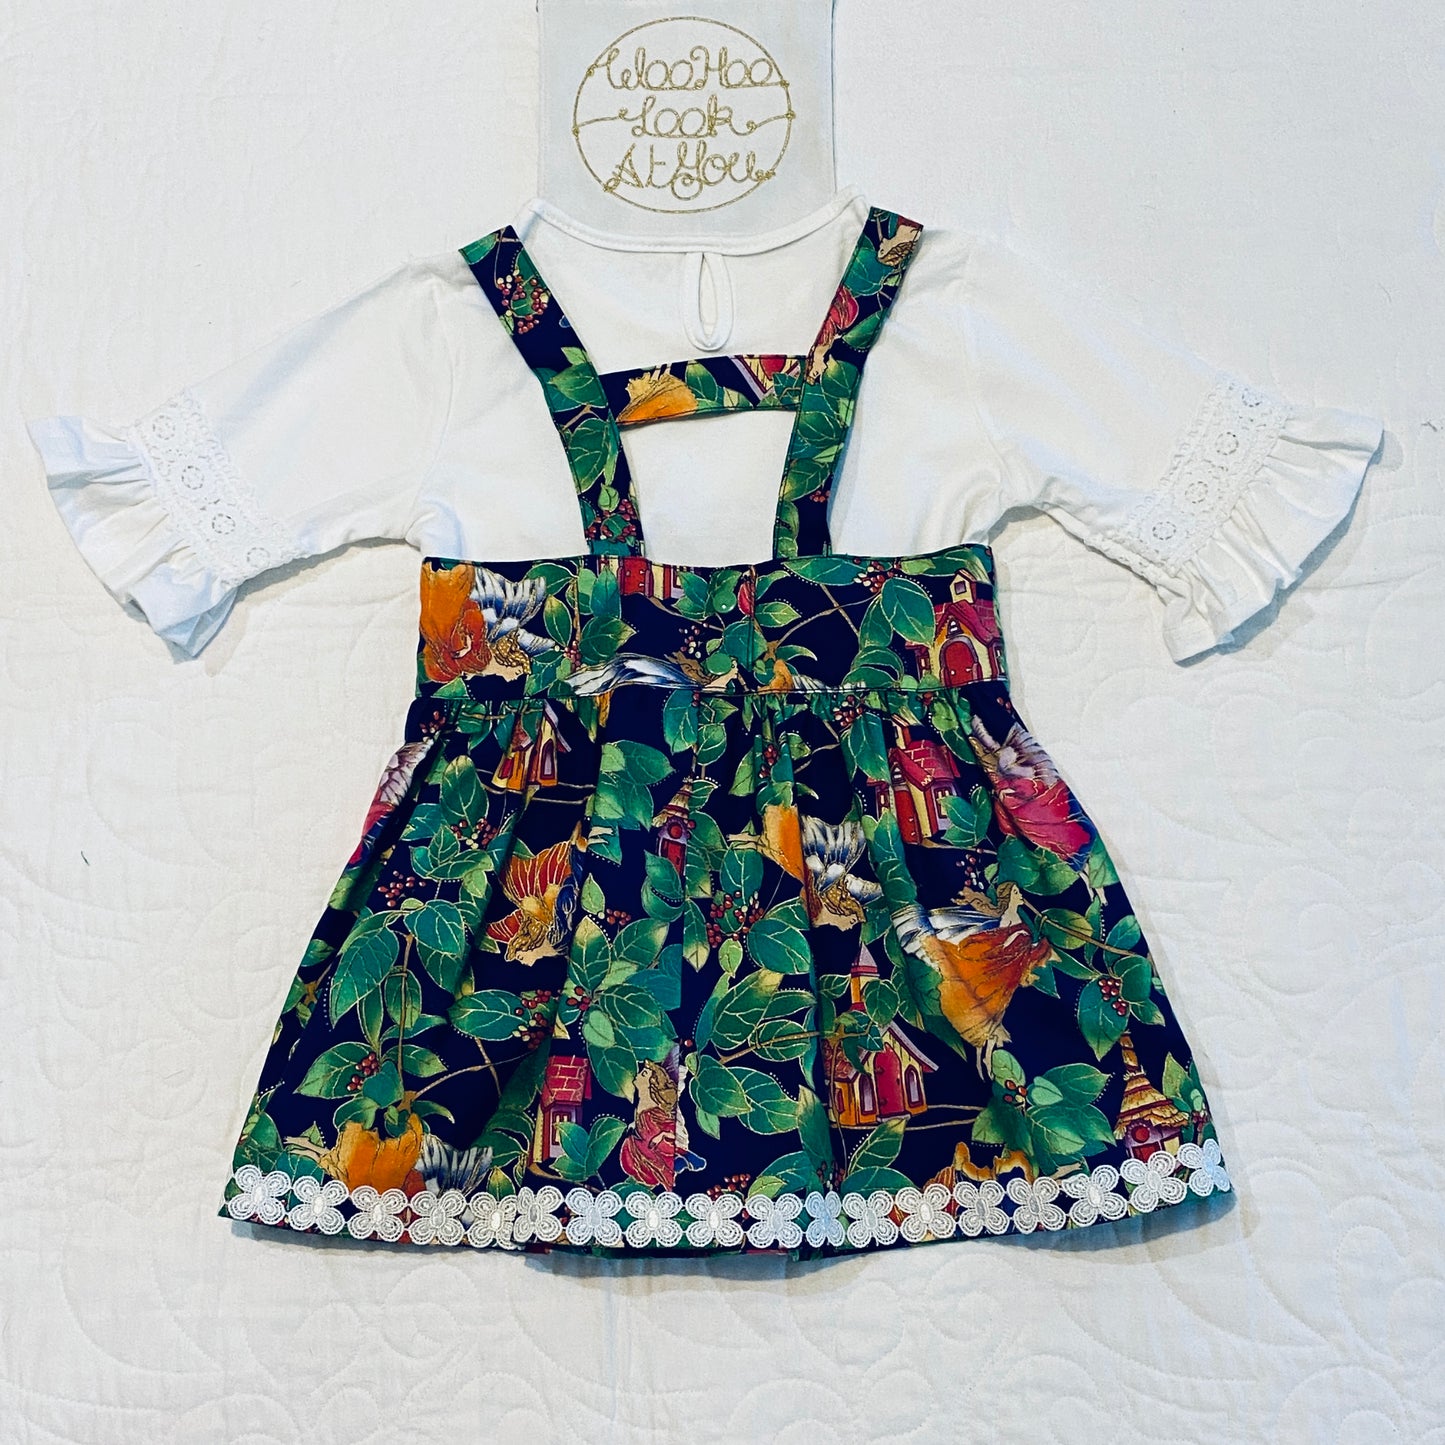 2 Piece - Pinafore - Fairies in the Forest with Chapels and Gold Highlights - Matching White Readymade Tee